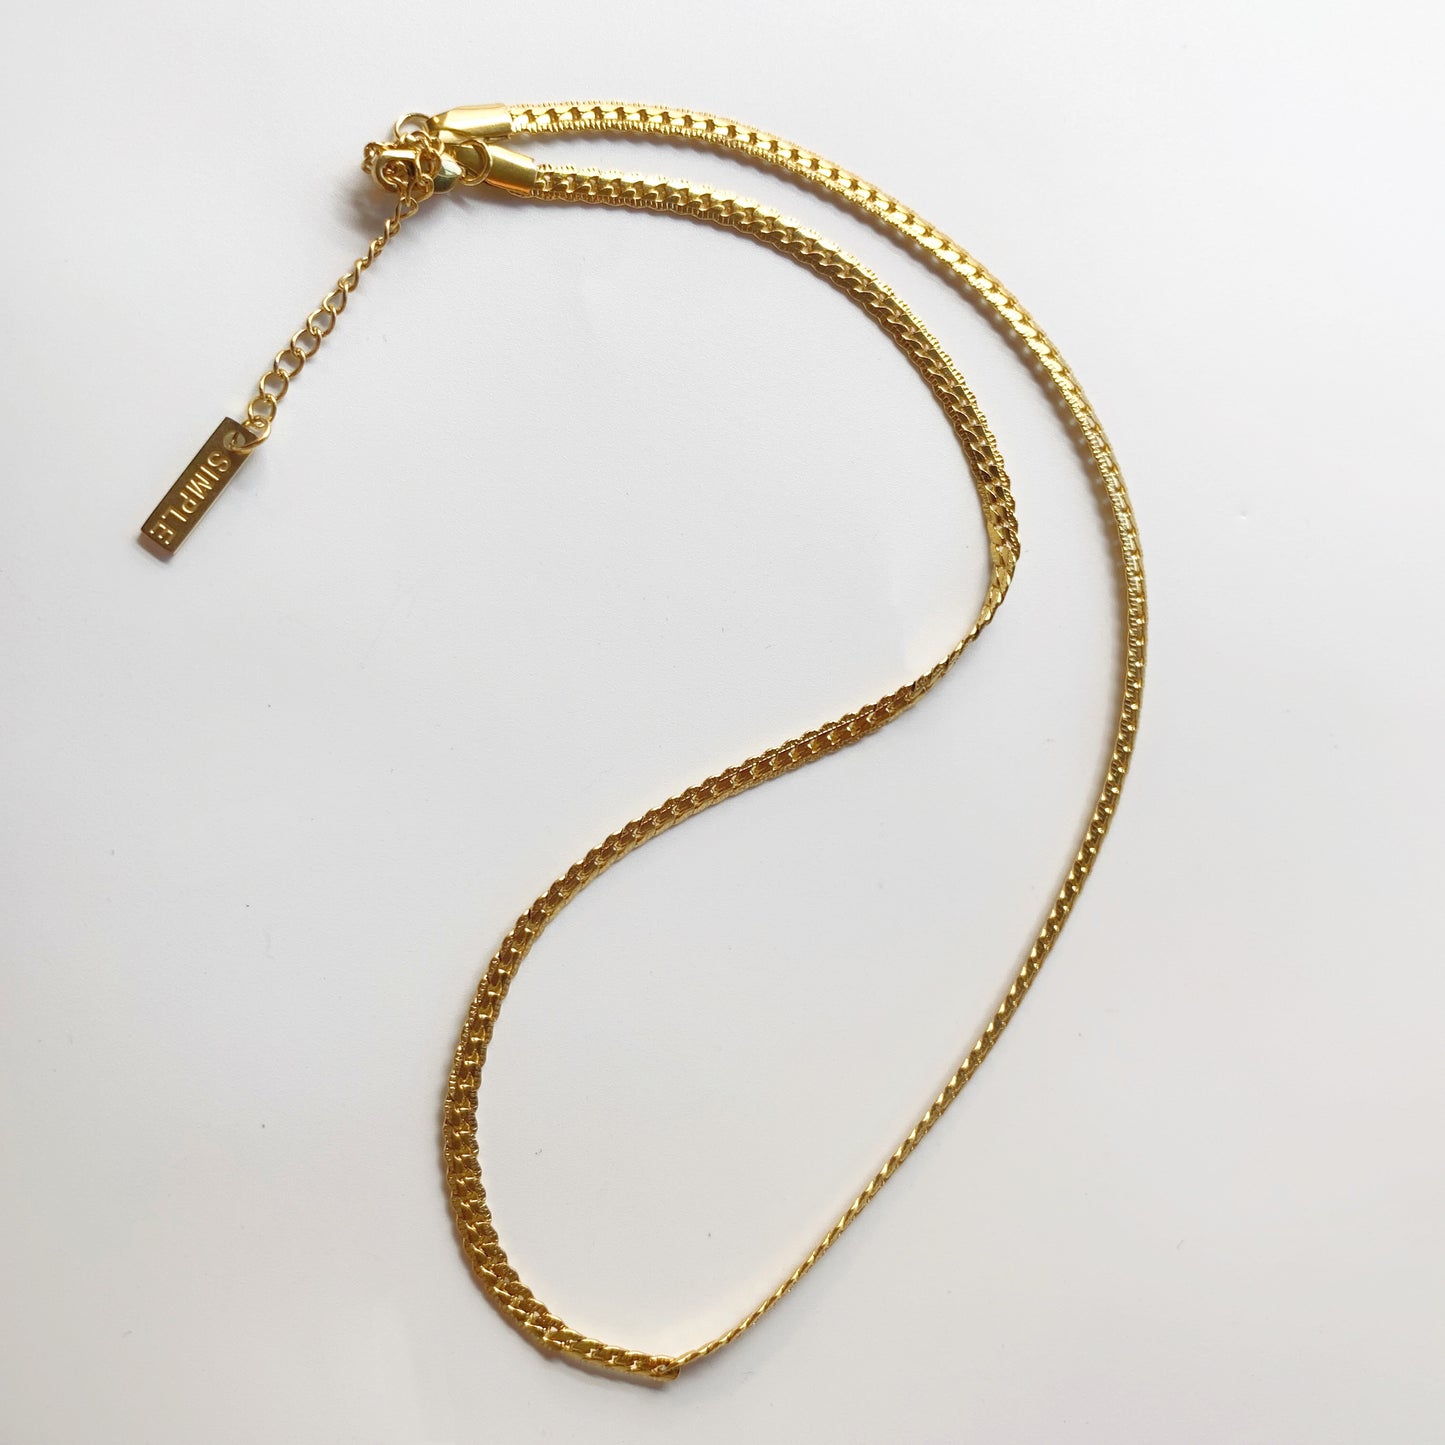 Vintage Style Italian Yellow Gold Chain Necklace